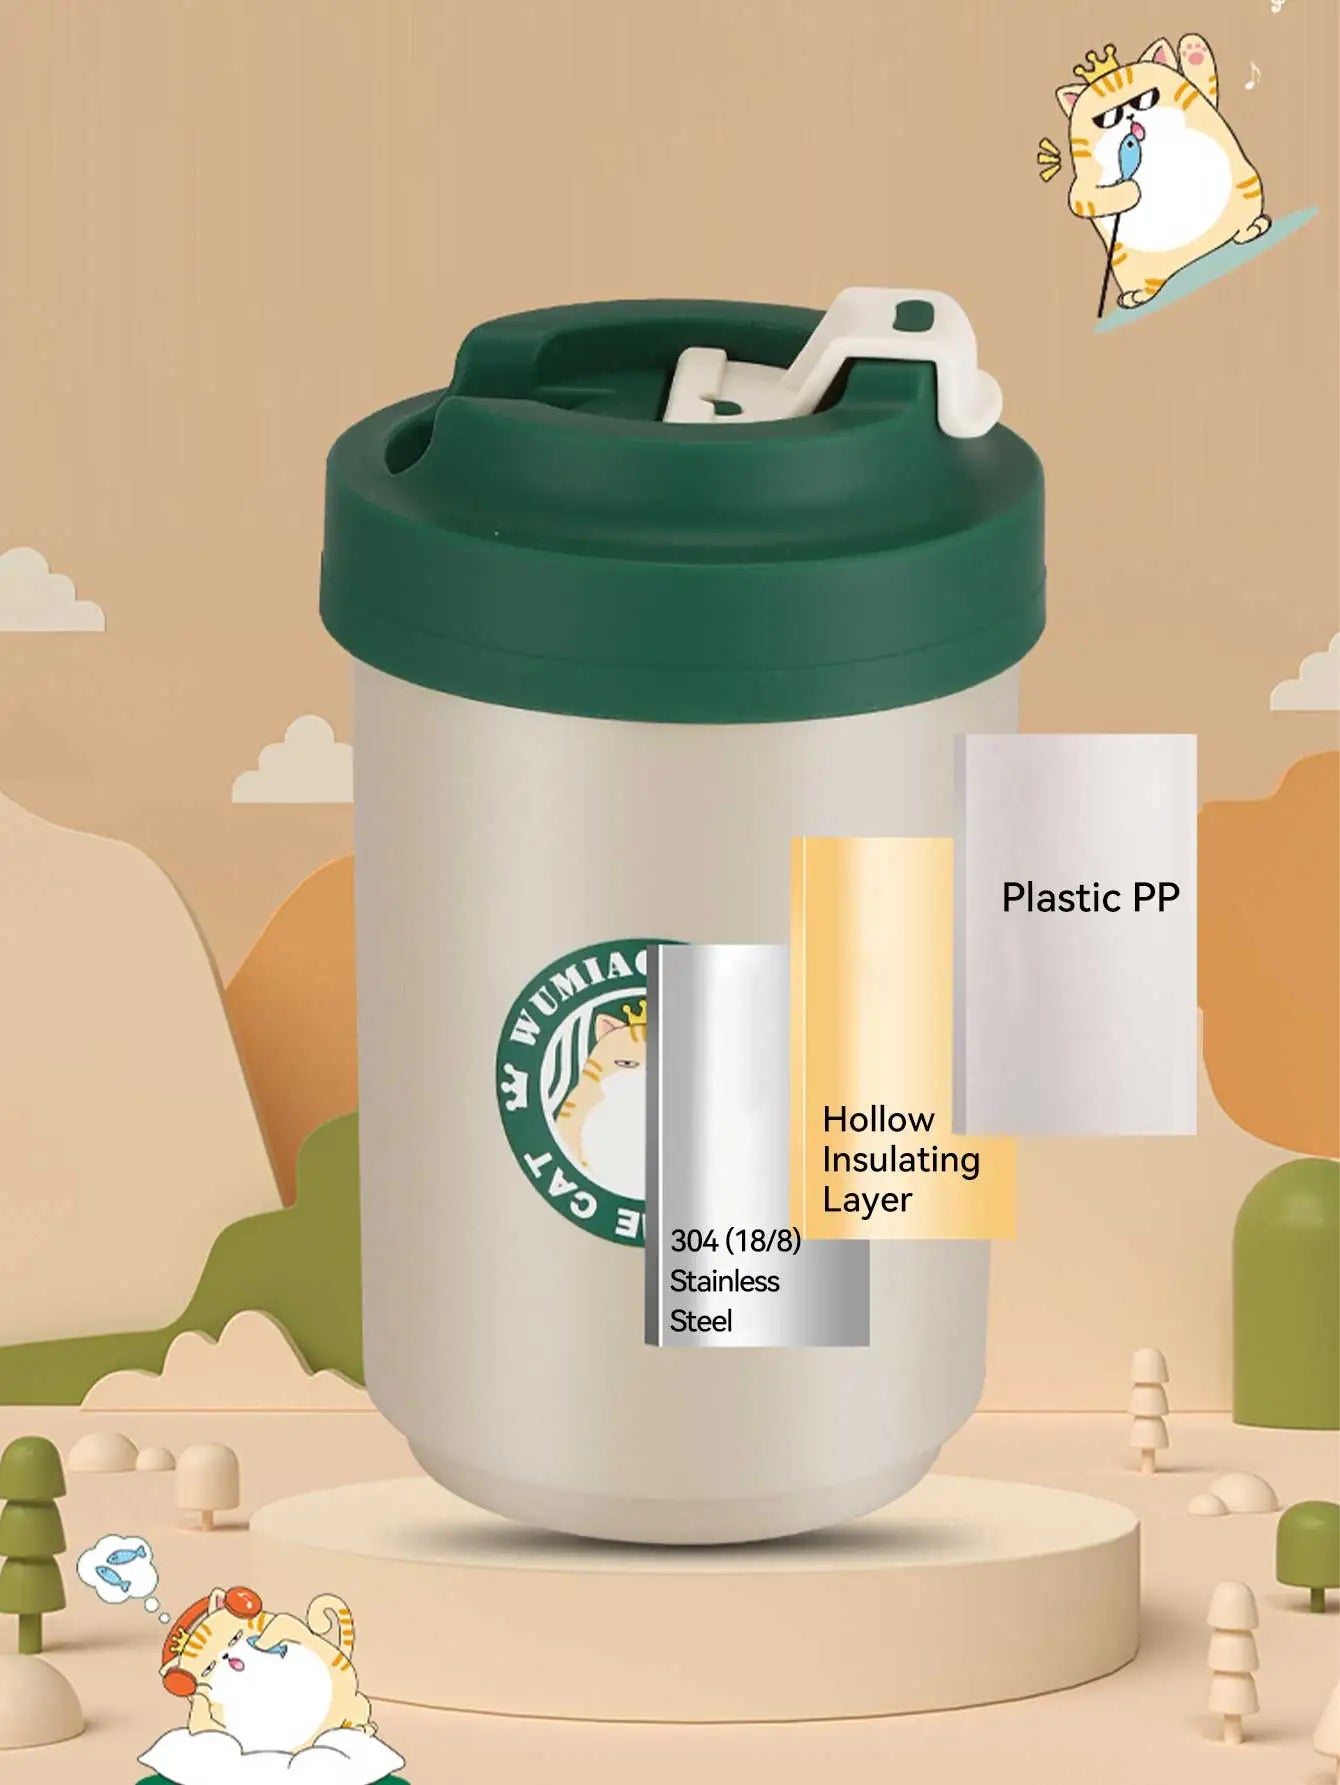 Stainless Steel Travel Mug: Leak-Proof, Portable, Perfect for Any Beverage!